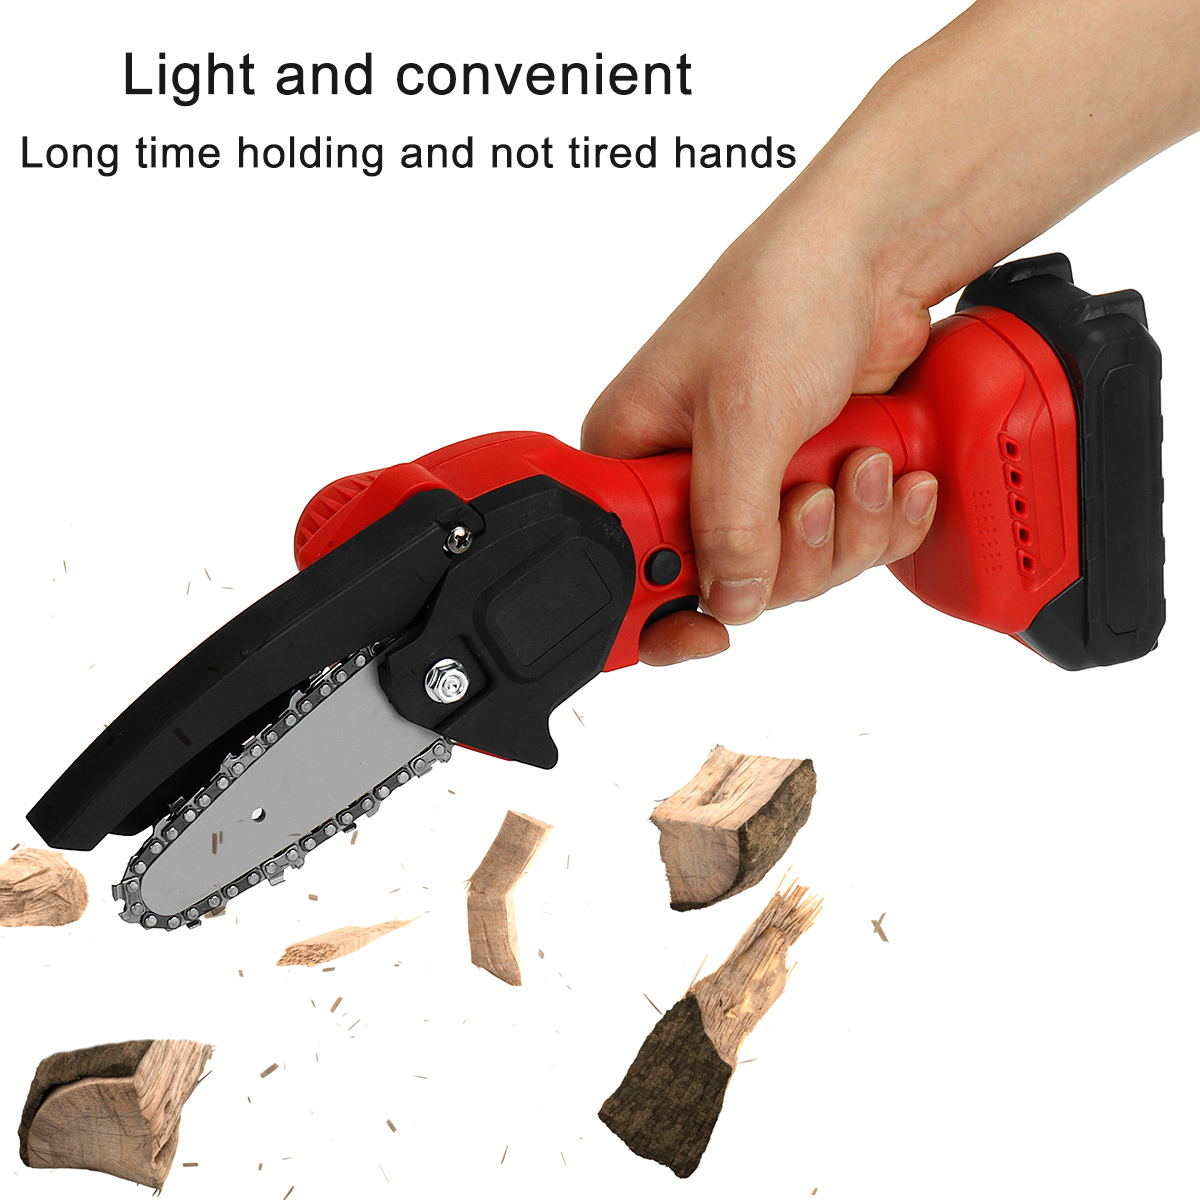 68VF-21V-4-Inch-Electric-Chainsaw-Cordless-Handheld-Rechargeable-Woodworking-Tool-W-None1pc2pcs-Batt-1843119-4